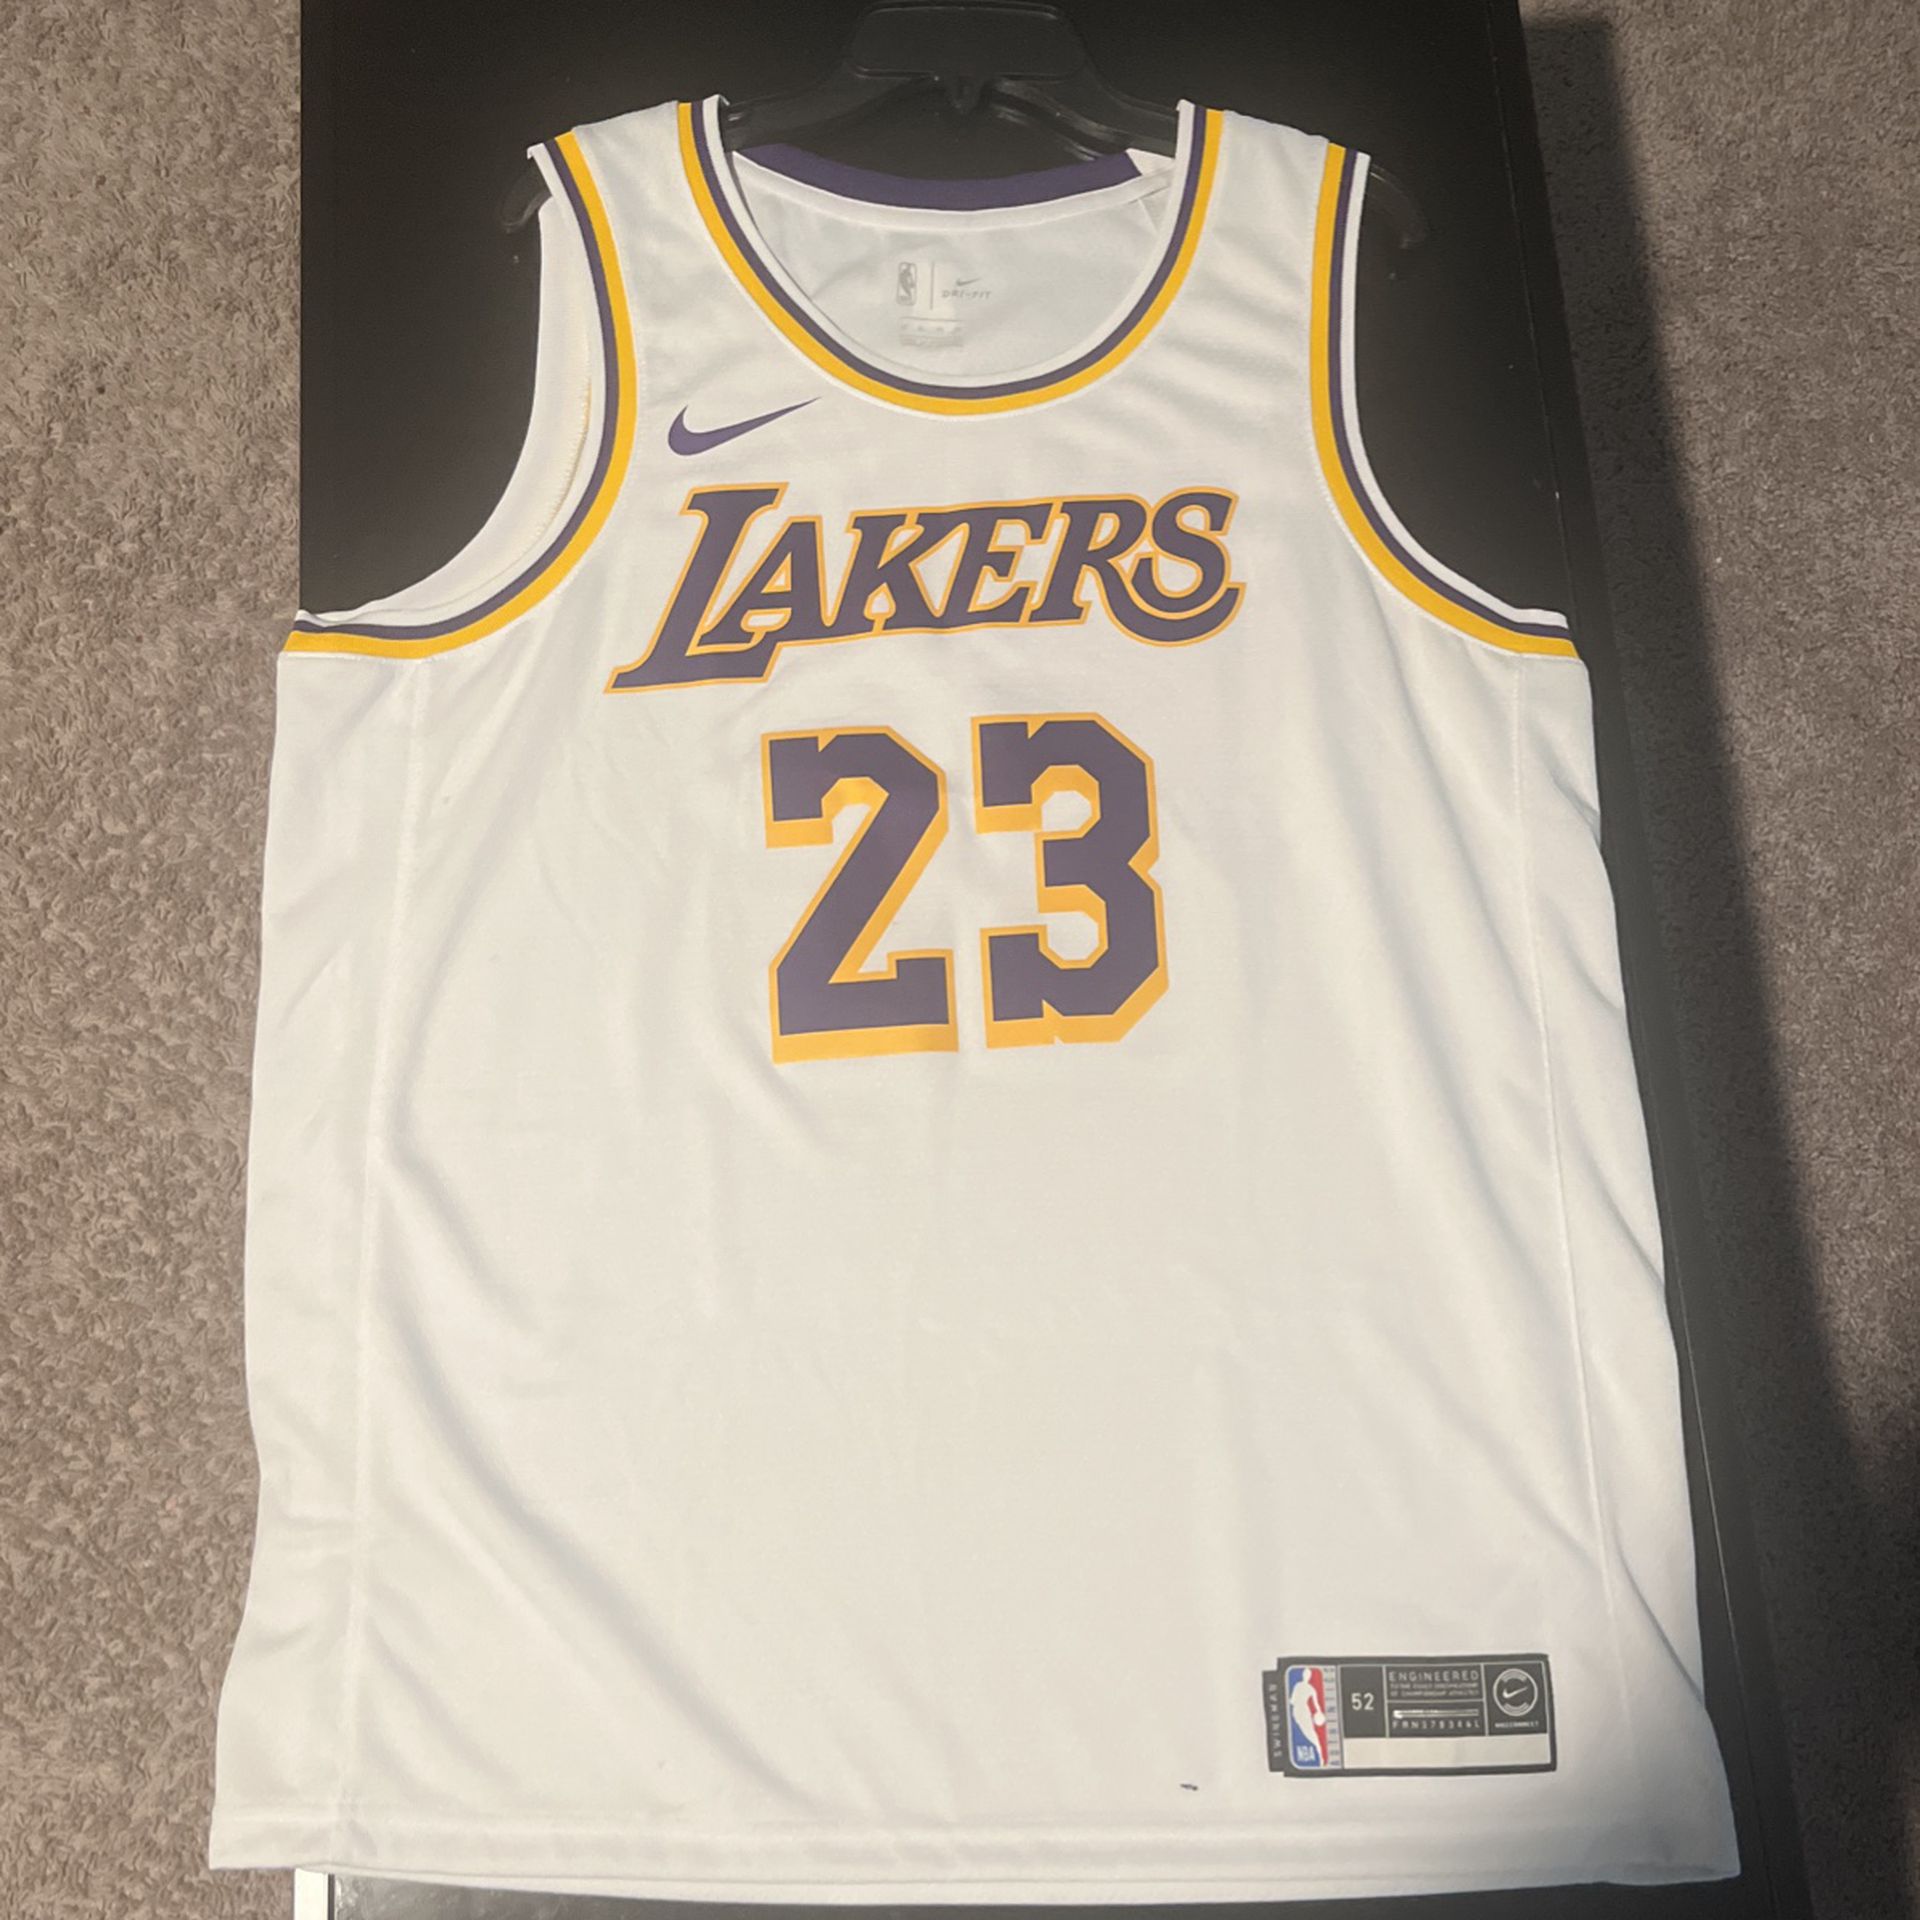 Authentic XL NBA Jersey White